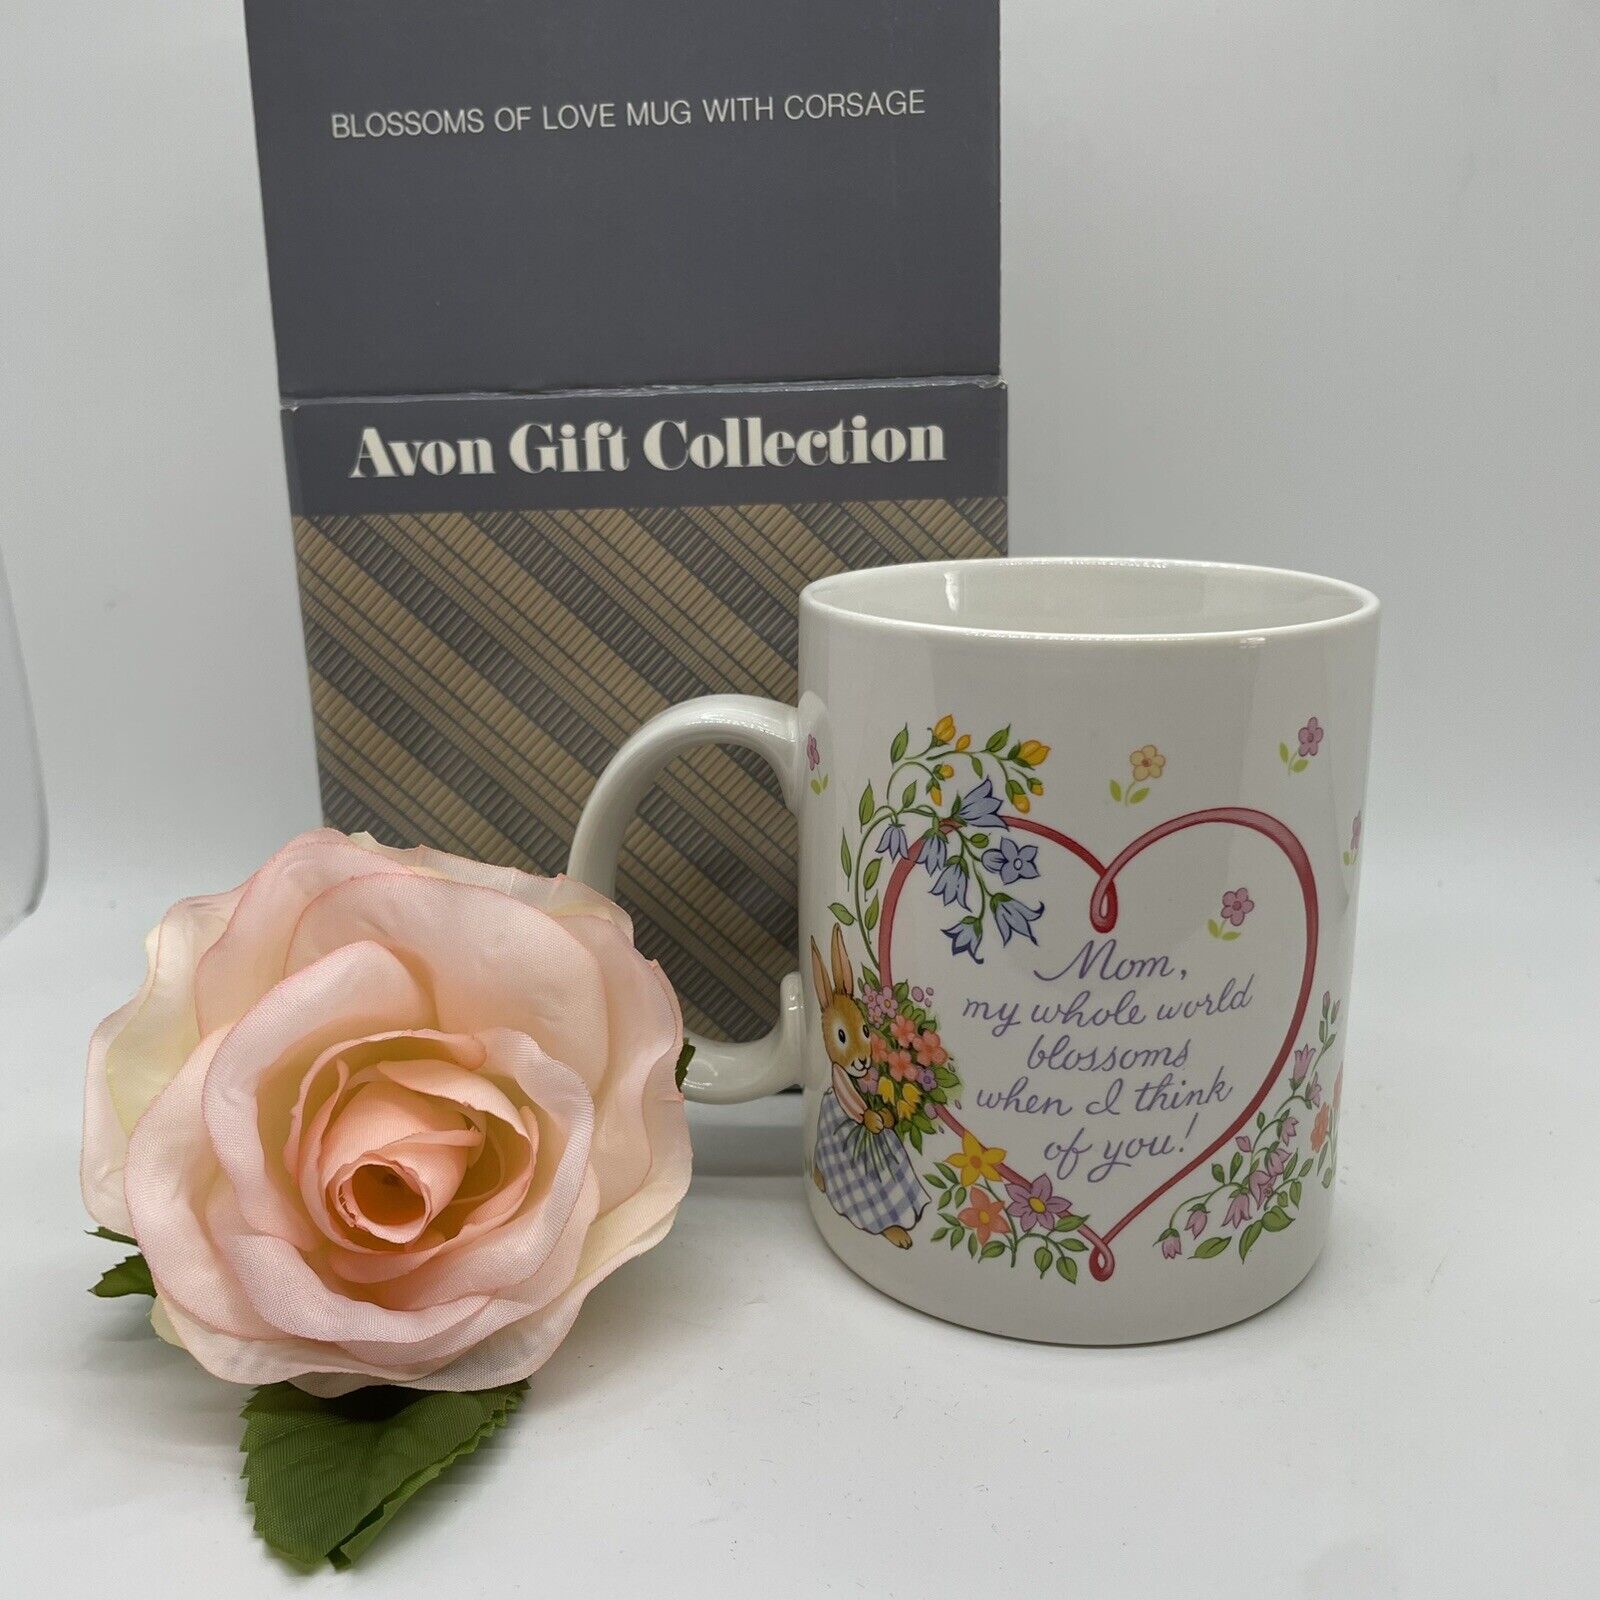 Vintage  Avon Mom Blossoms of Love Mug with Corsage. NOS, Open Box